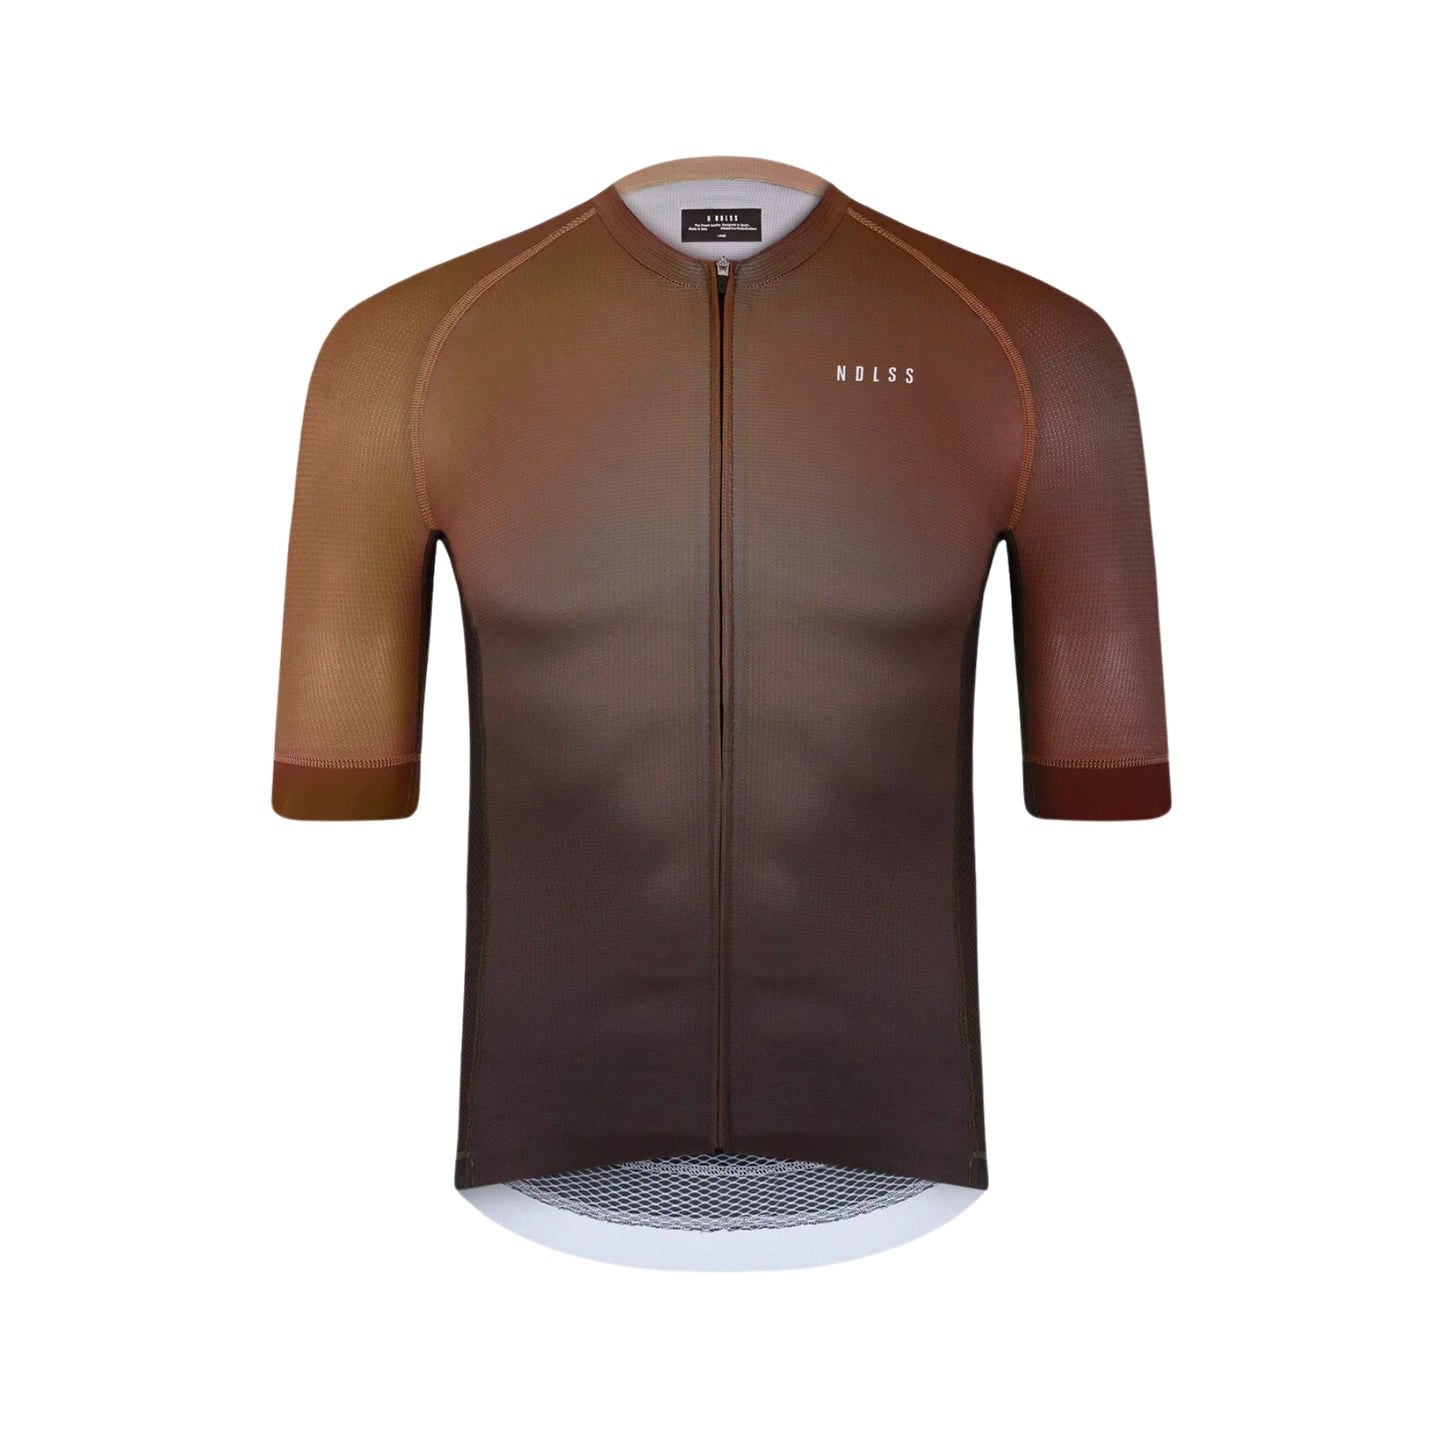 Maillot Corto NDLSS Fast Toffee